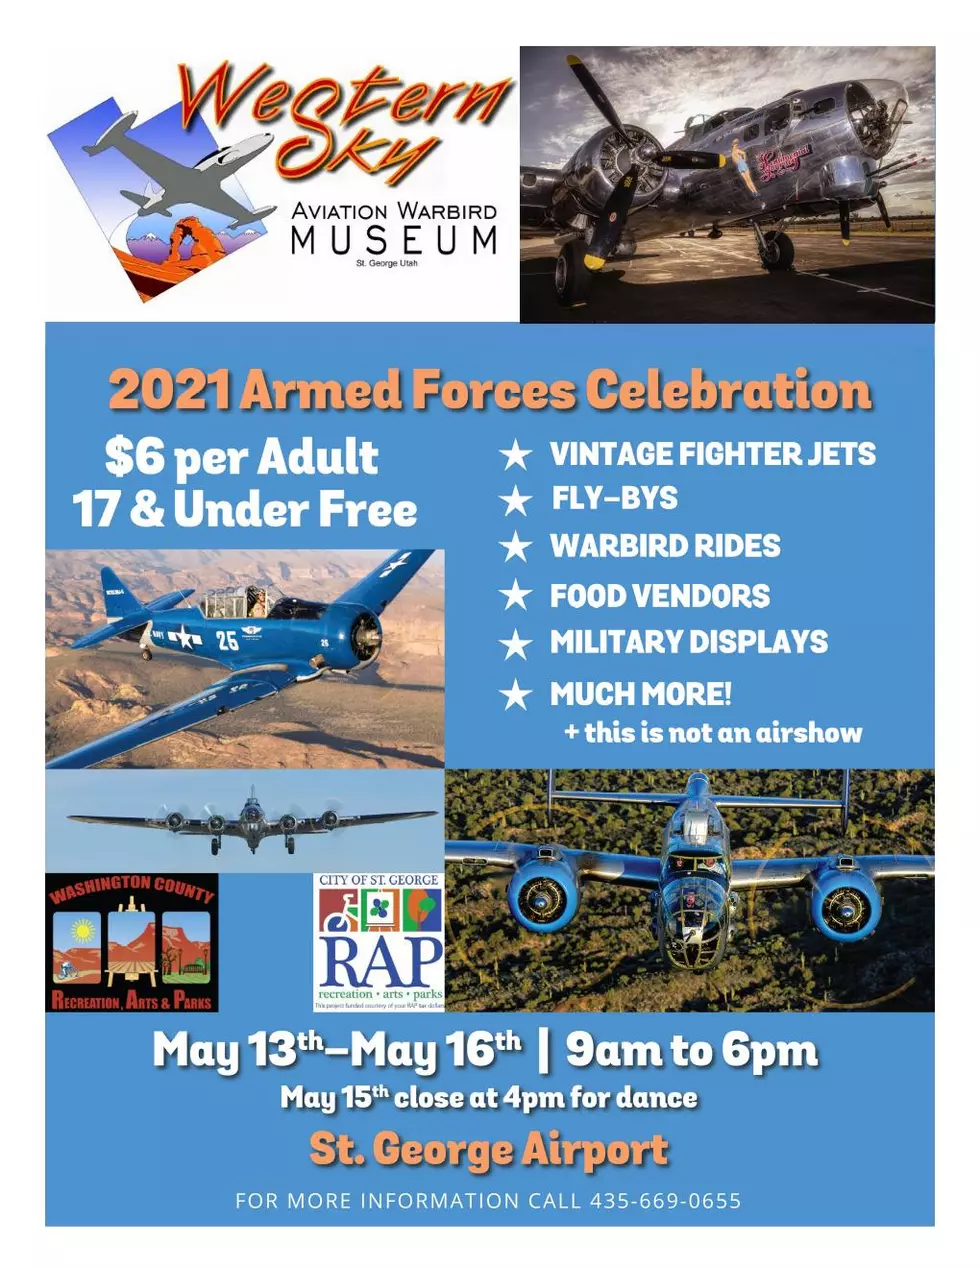 Western Sky Aviation Warbird Museum is holding a week end event starting May 13